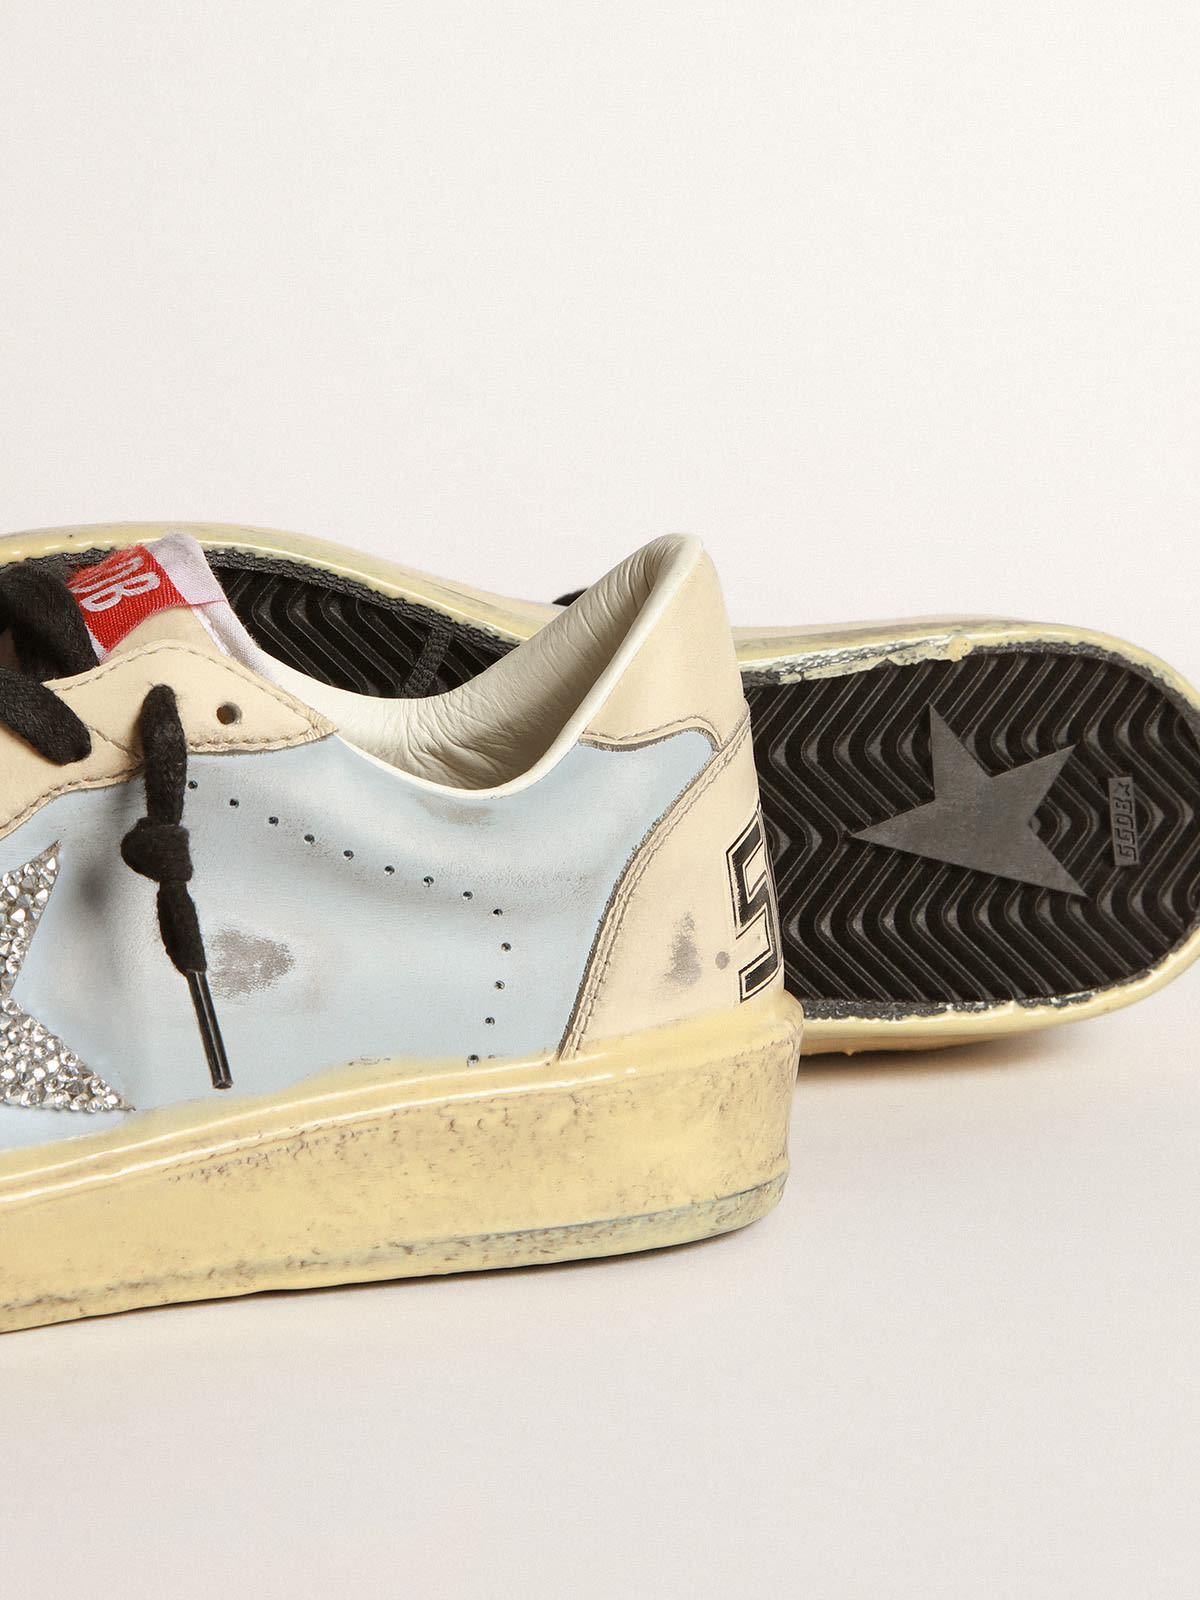 Golden Goose - Men’s Ball Star LAB in smoky light-blue leather with Swarovski star in 